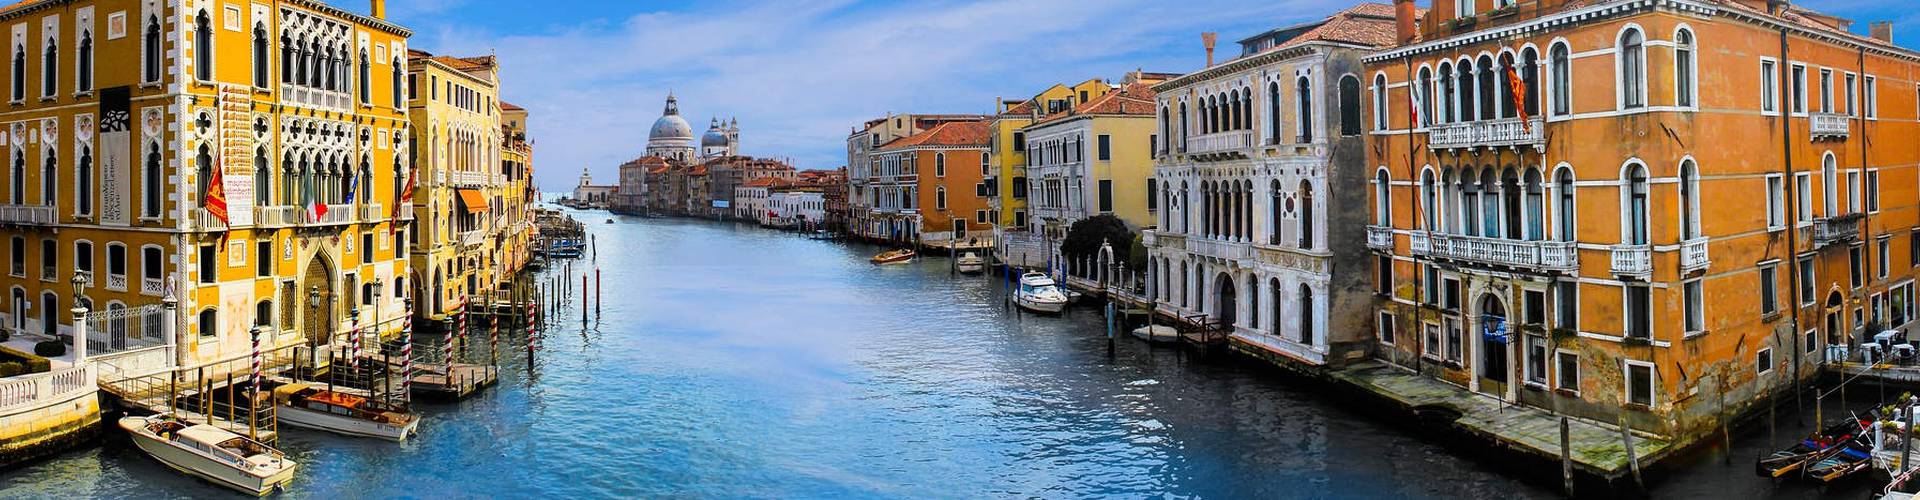 Space Hotels - VENICE - 